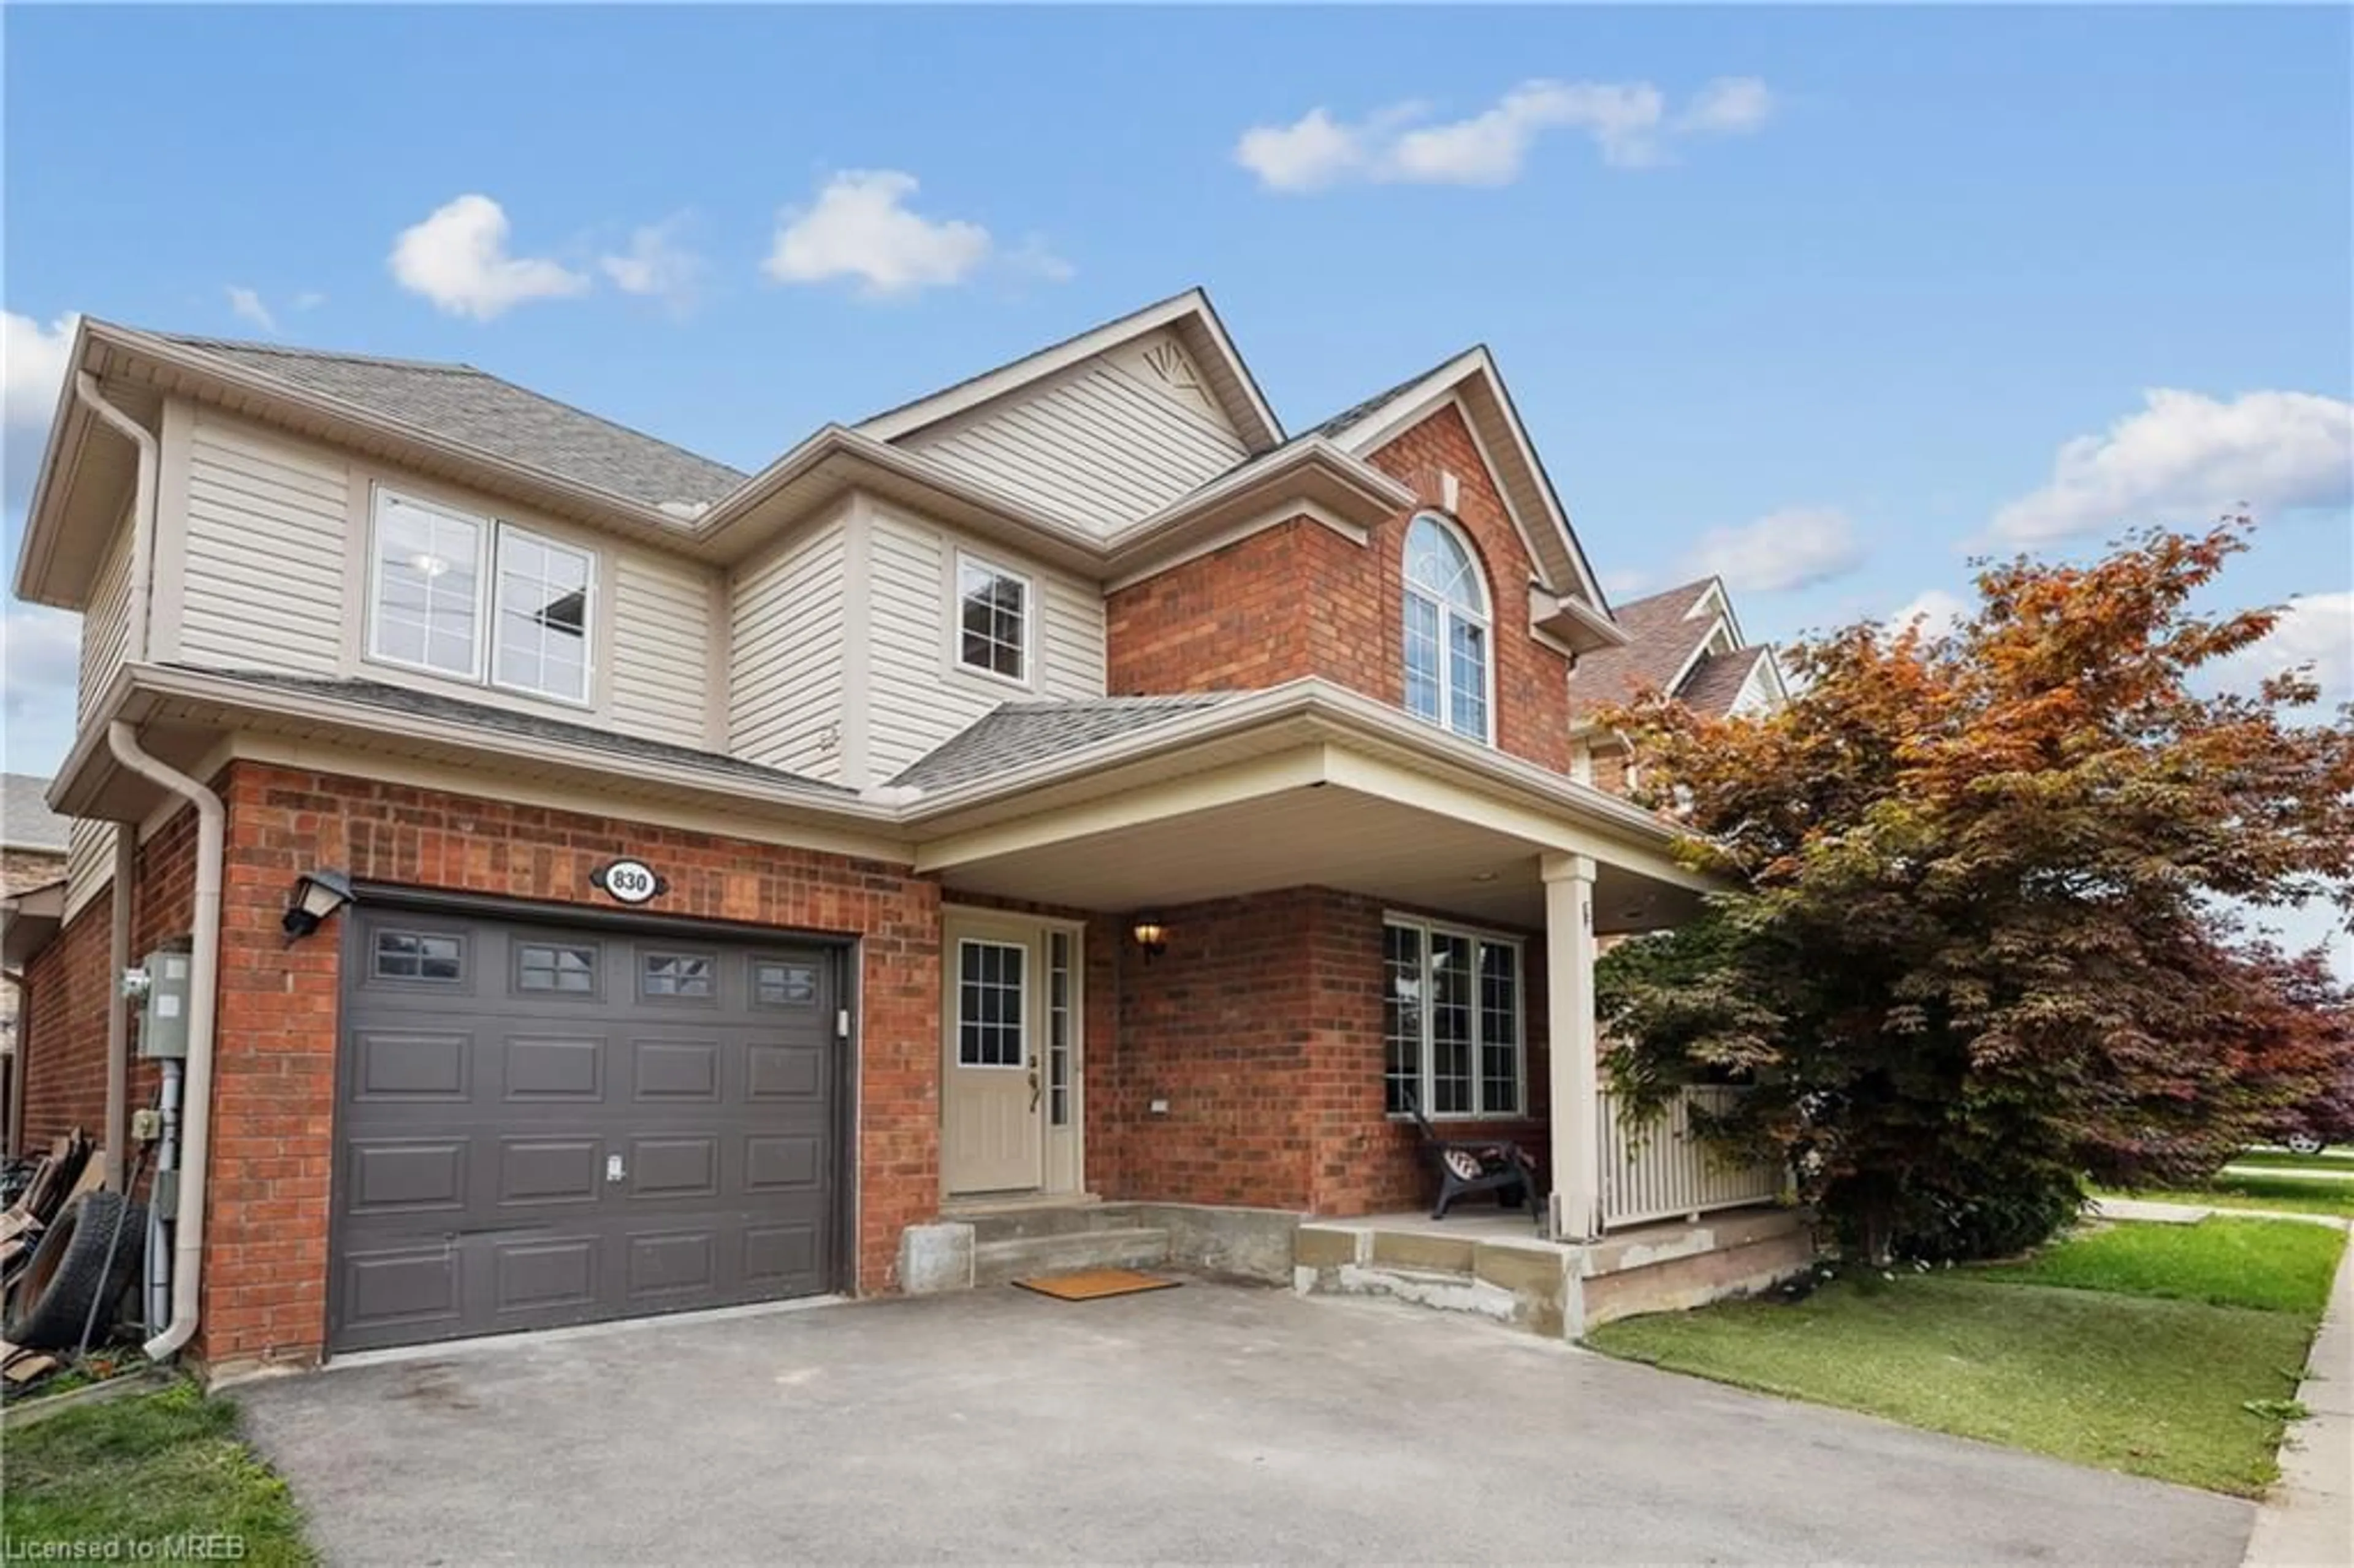 Home with brick exterior material for 830 Fourth Line, Milton Ontario L9T 6M5